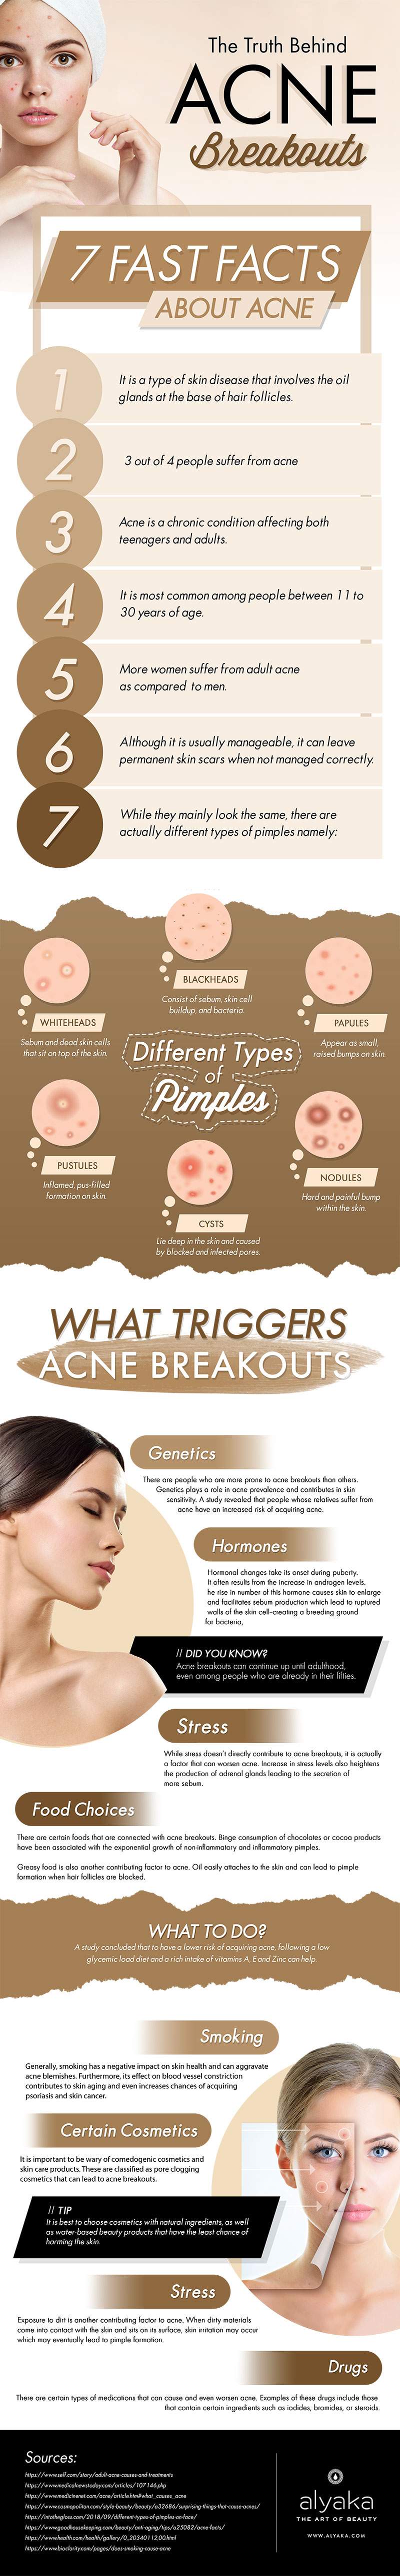 The Truth Behind Acne Breakouts